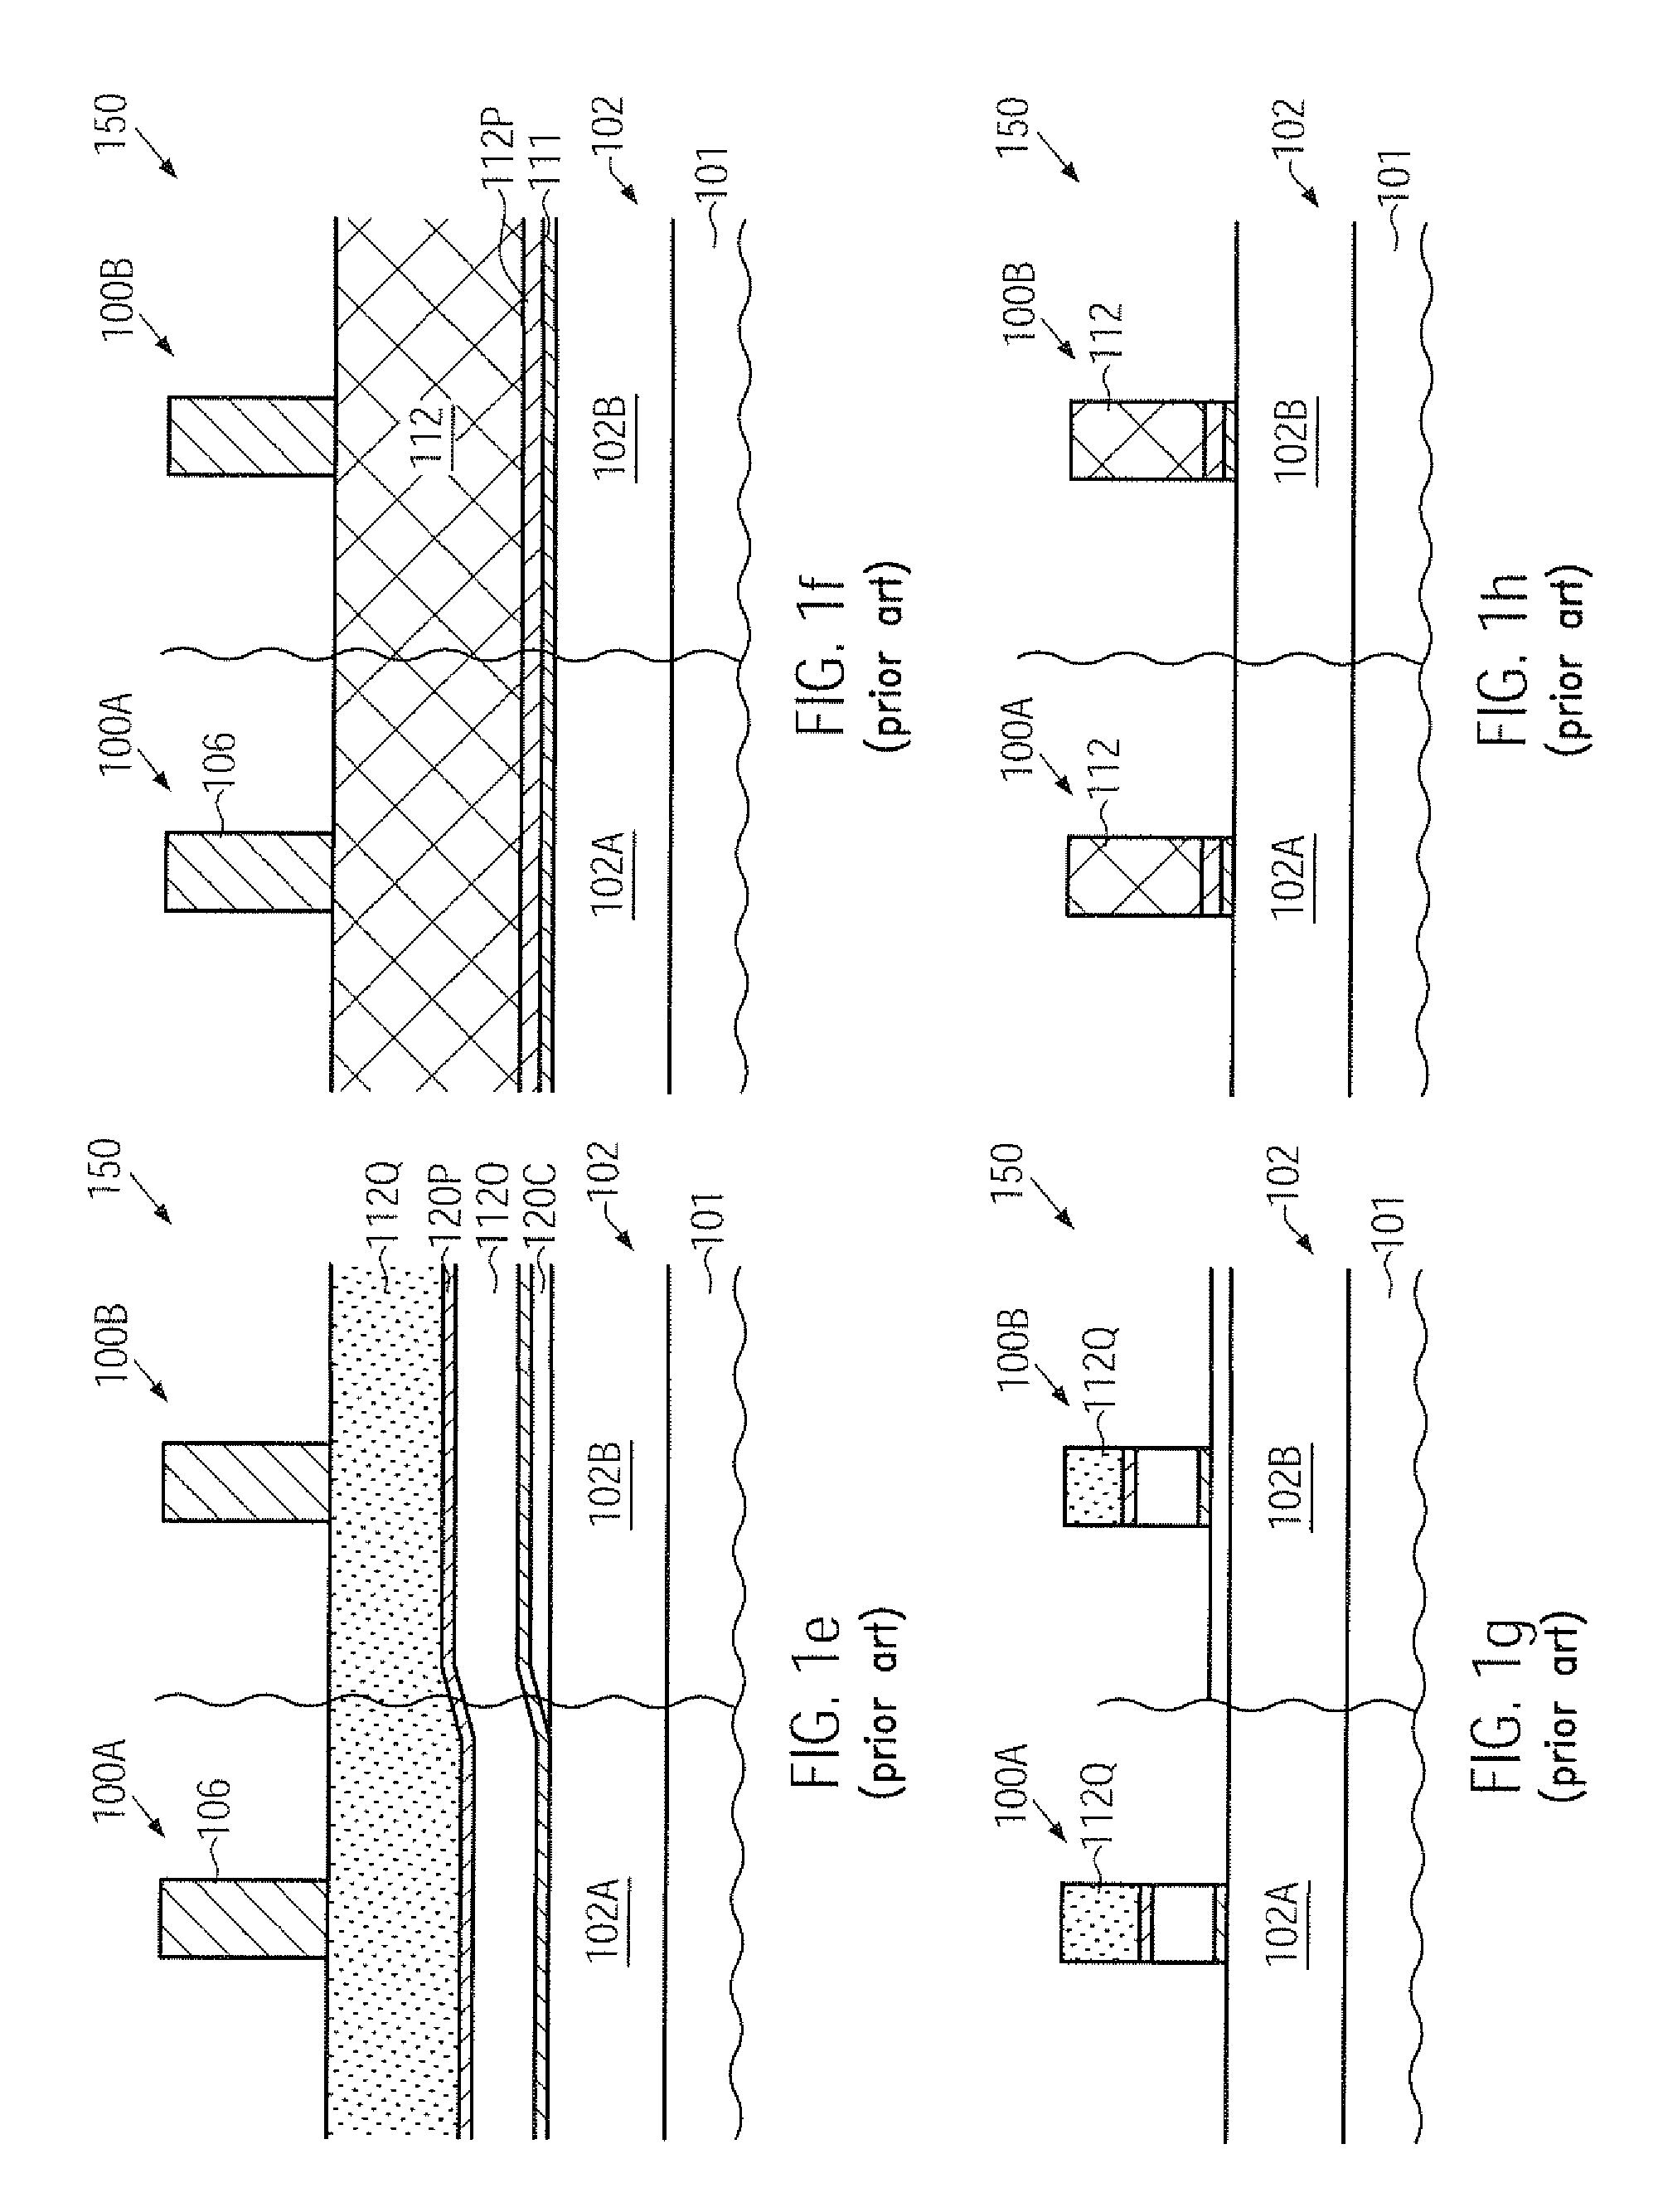 Short channel transistor with reduced length variation by using amorphous electrode material during implantation